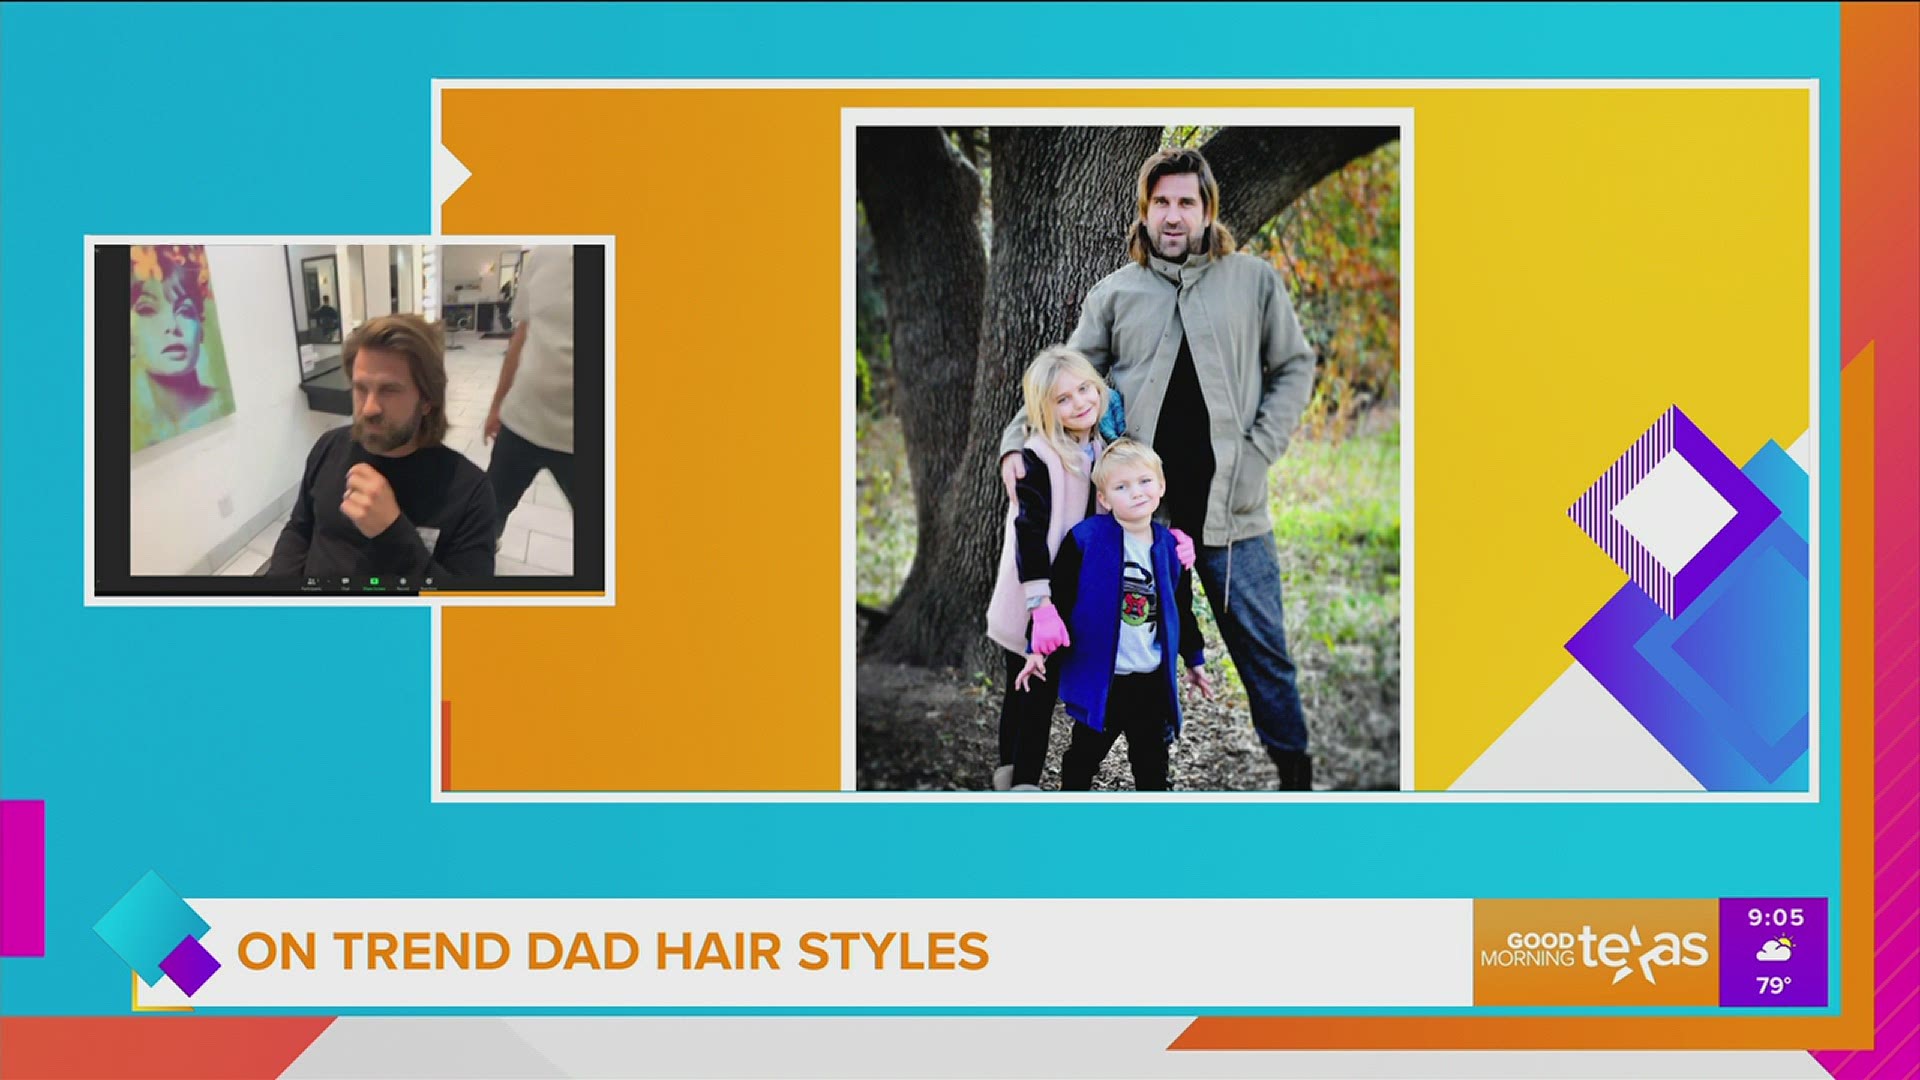 Trendy and age appropriate hair styles for dad to fit their lifestyle